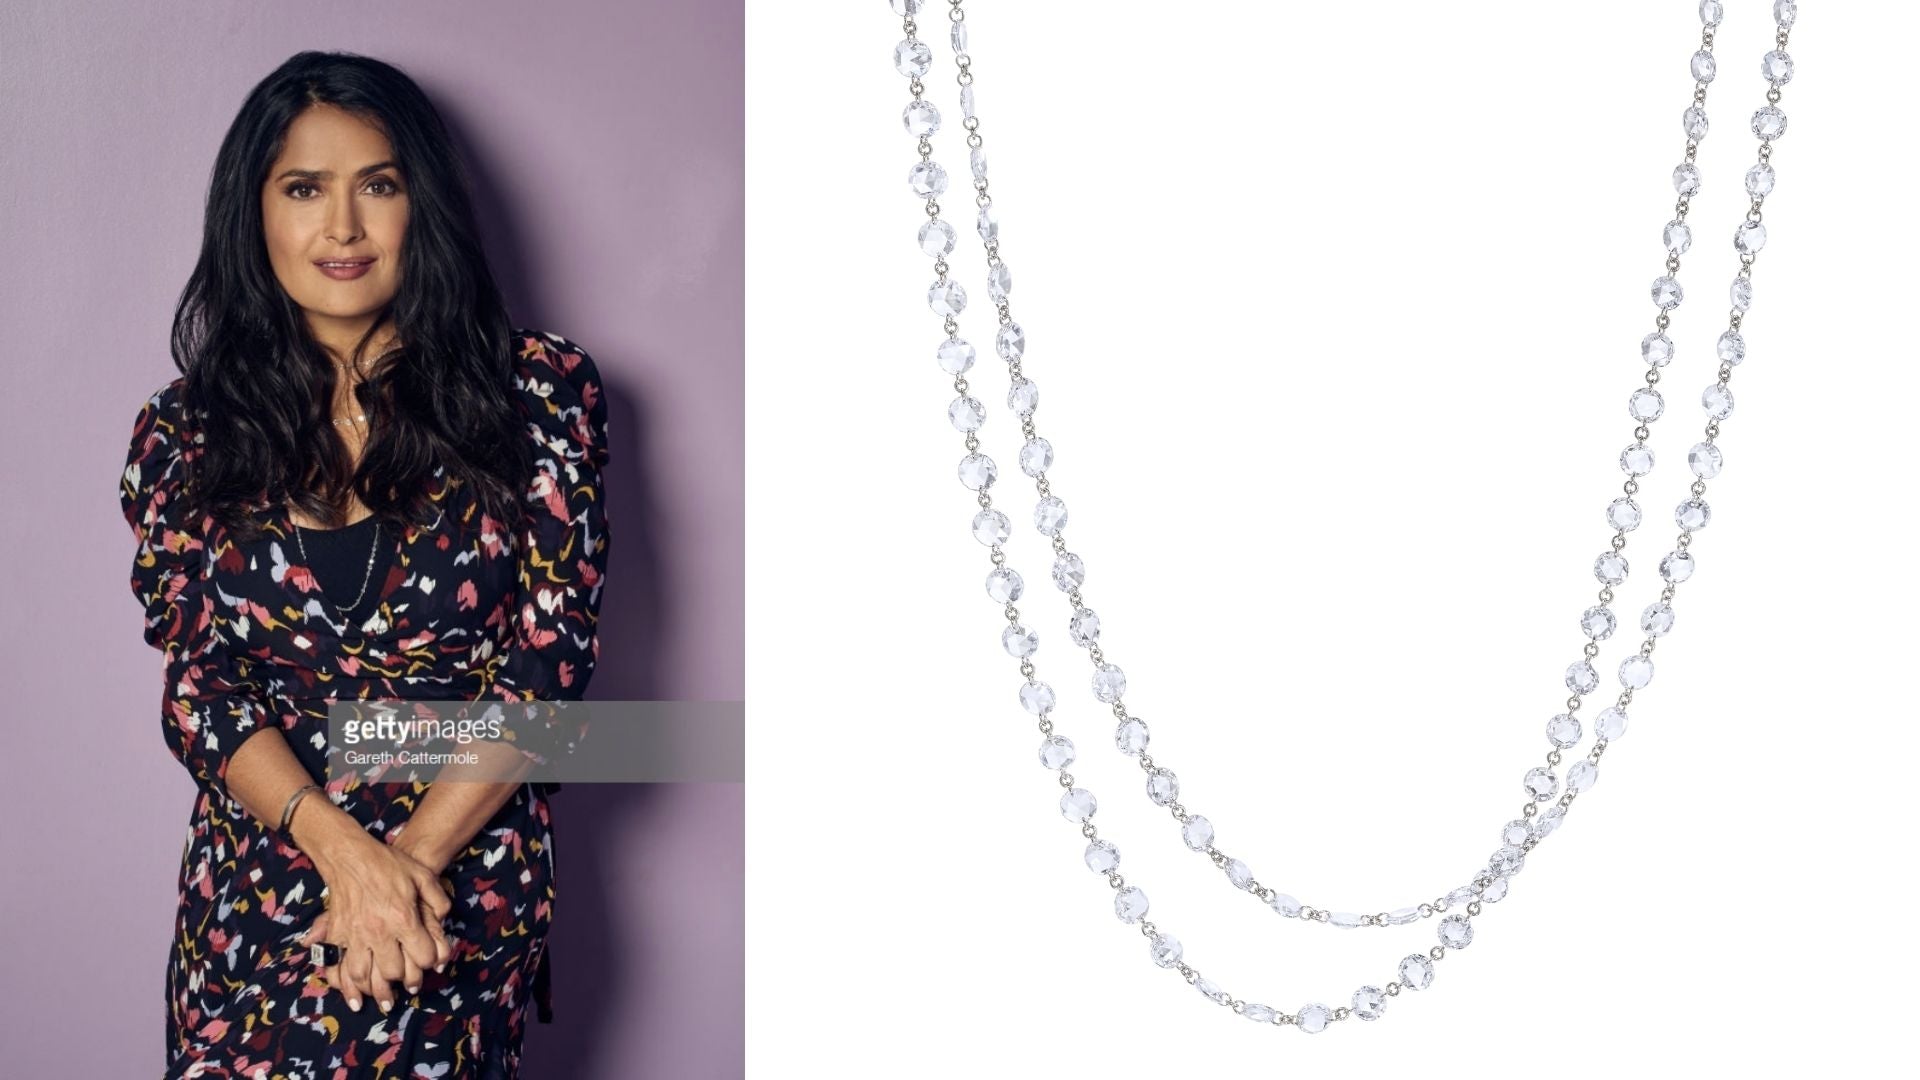 Salma Hayek with 64Facets wearing Ethereal Diamond Chain